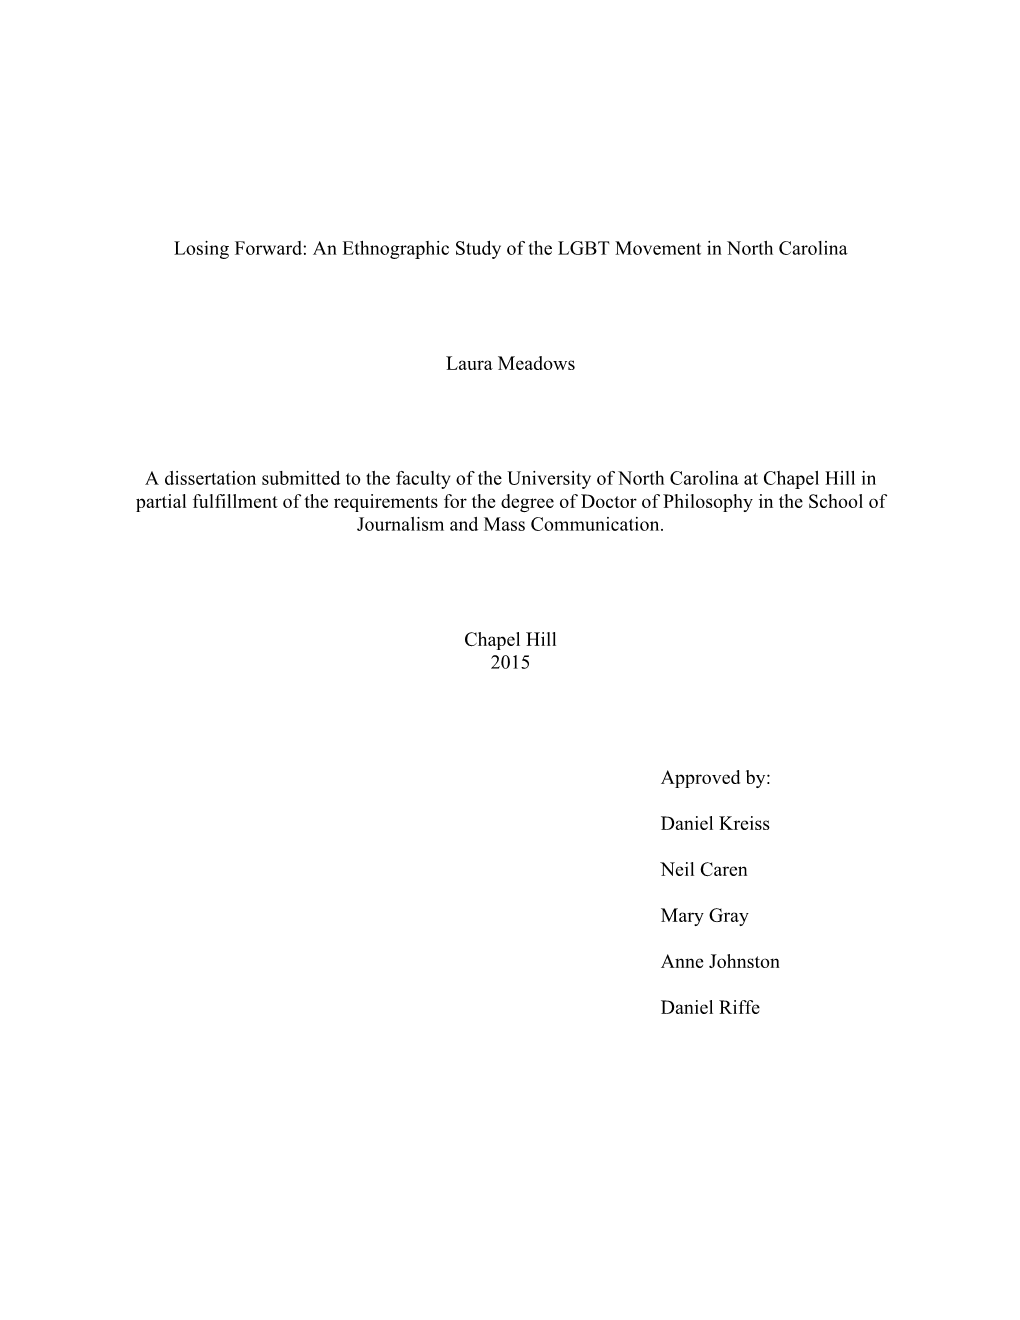 An Ethnographic Study of the LGBT Movement in North Carolina Laura